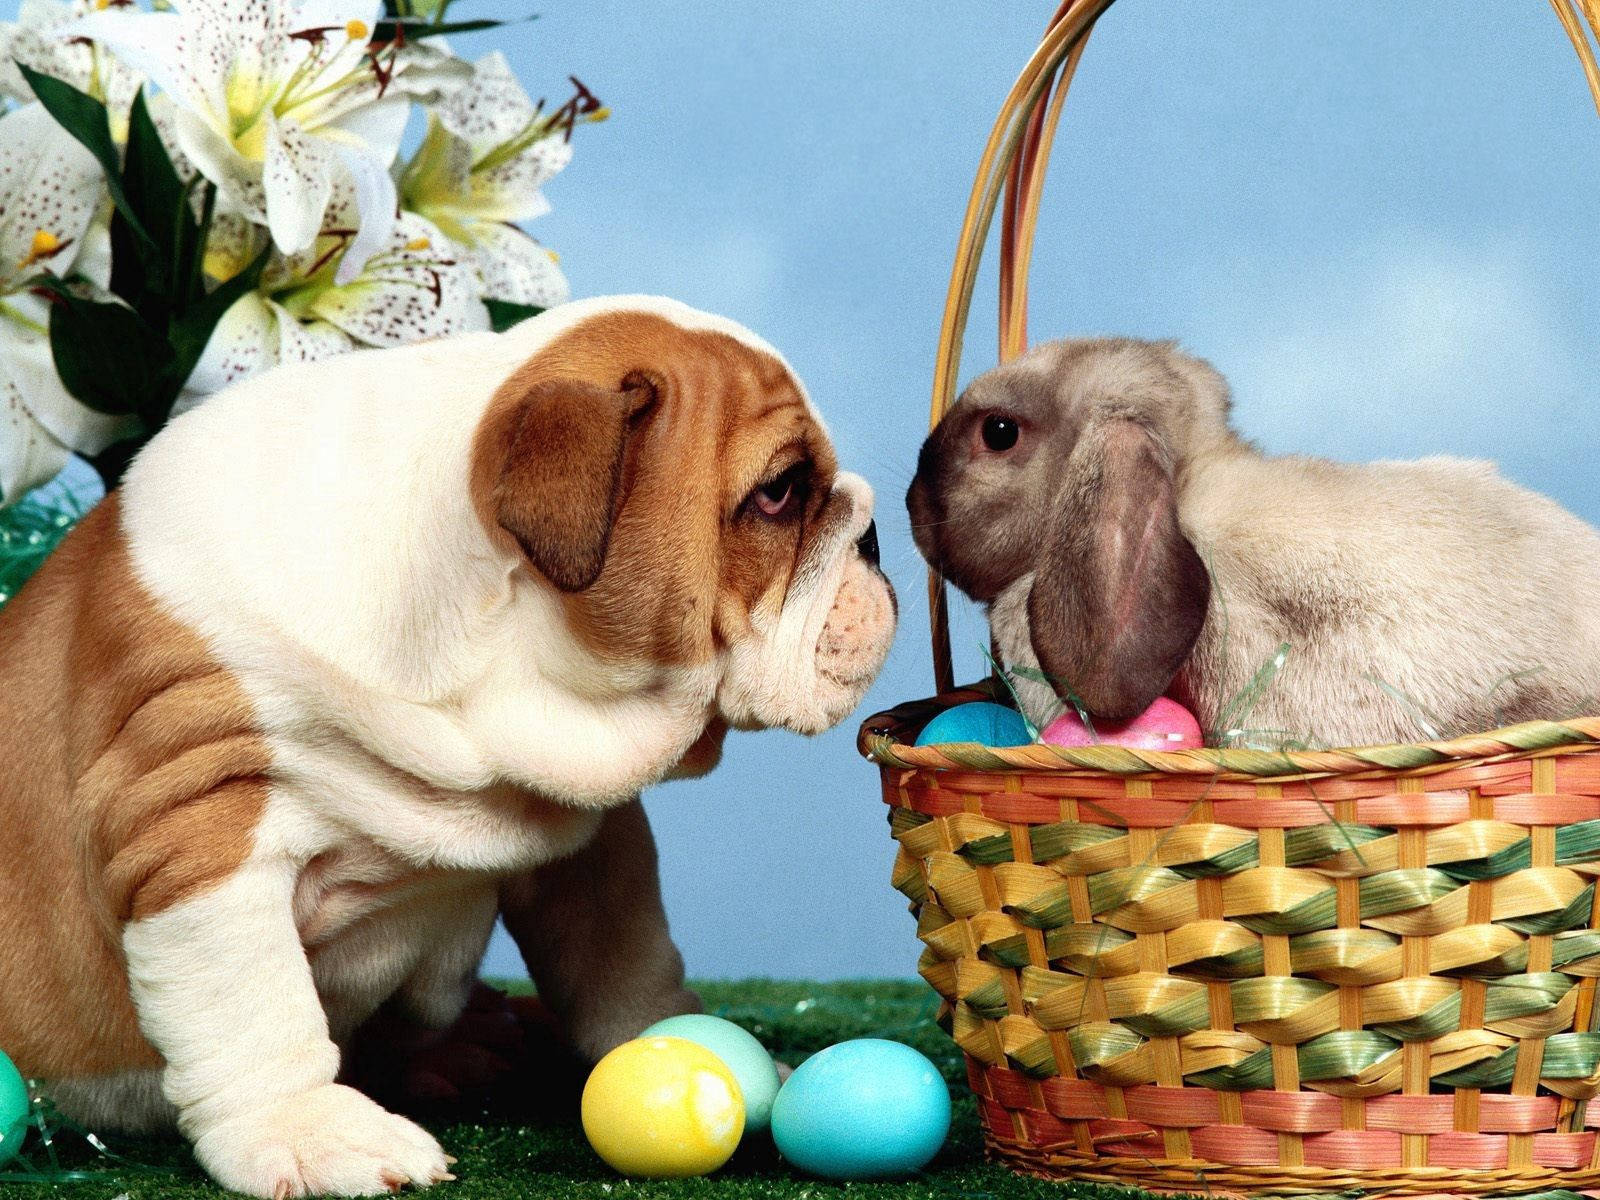 Love is in the air this Easter with a Bulldog and Rabbit cuddling Wallpaper